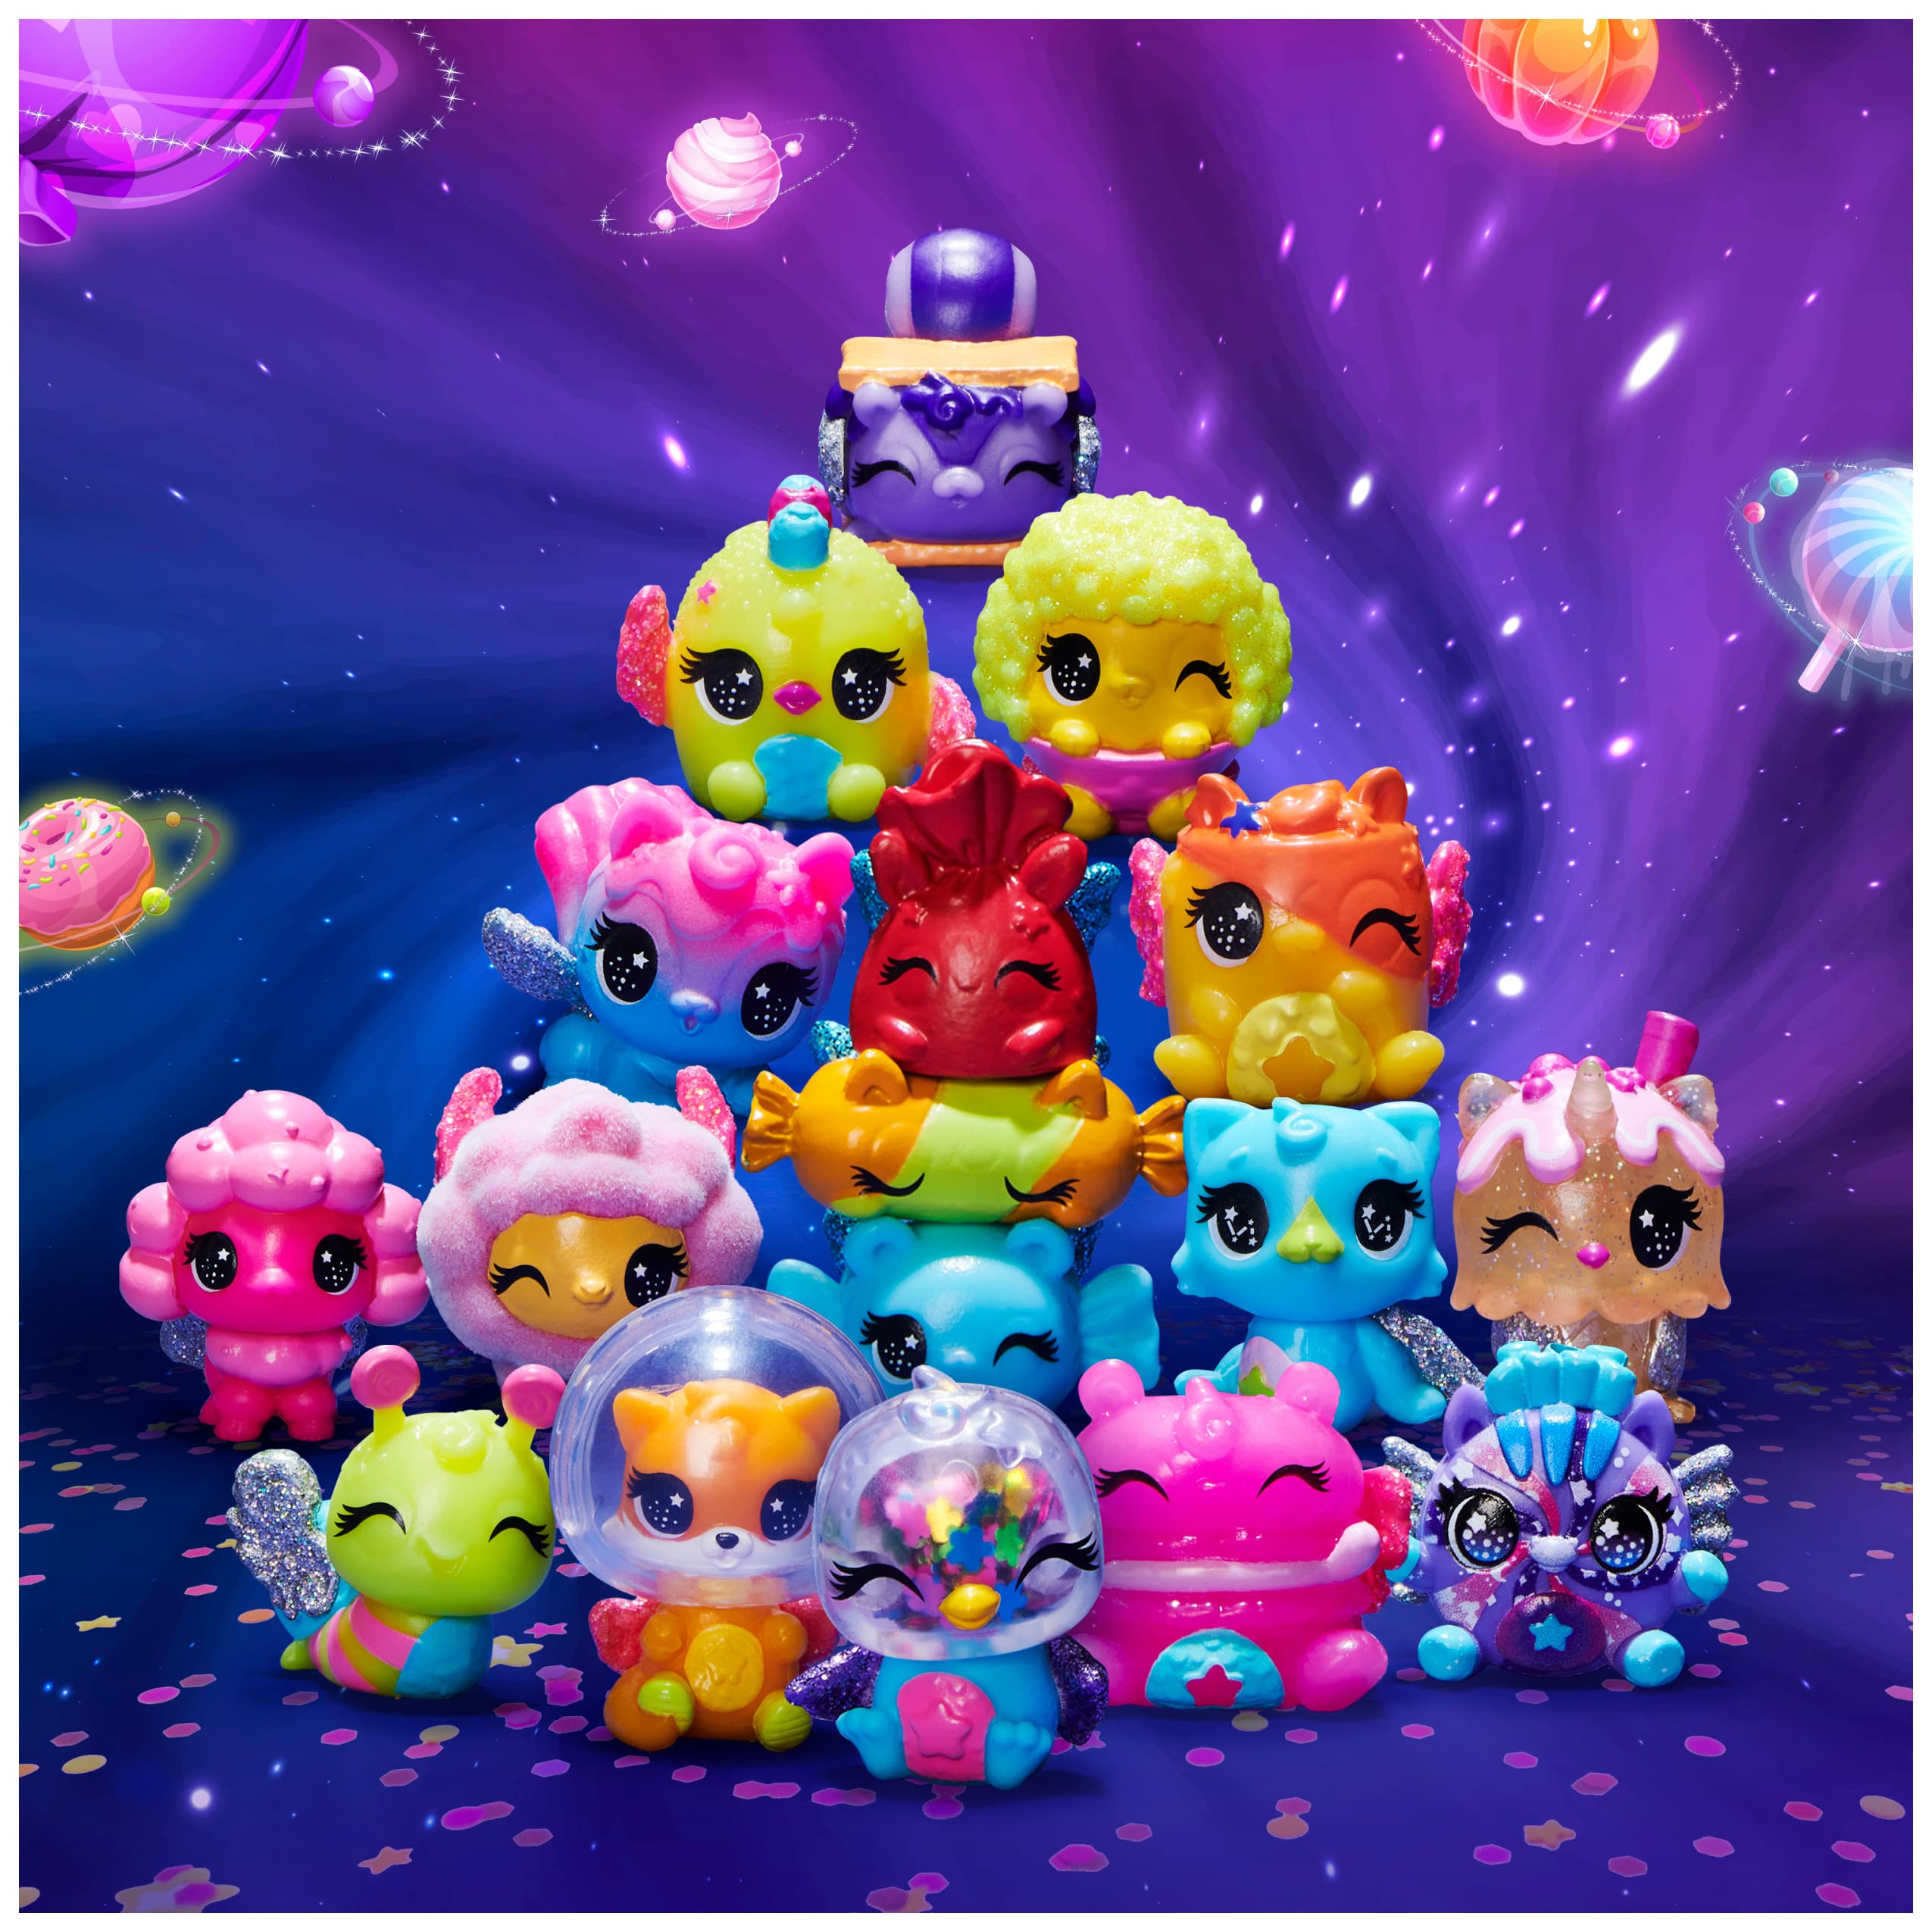 https://static.wikia.nocookie.net/hatchimals/images/b/b3/Cosmic-Candy8.jpg/revision/latest?cb=20230914083200